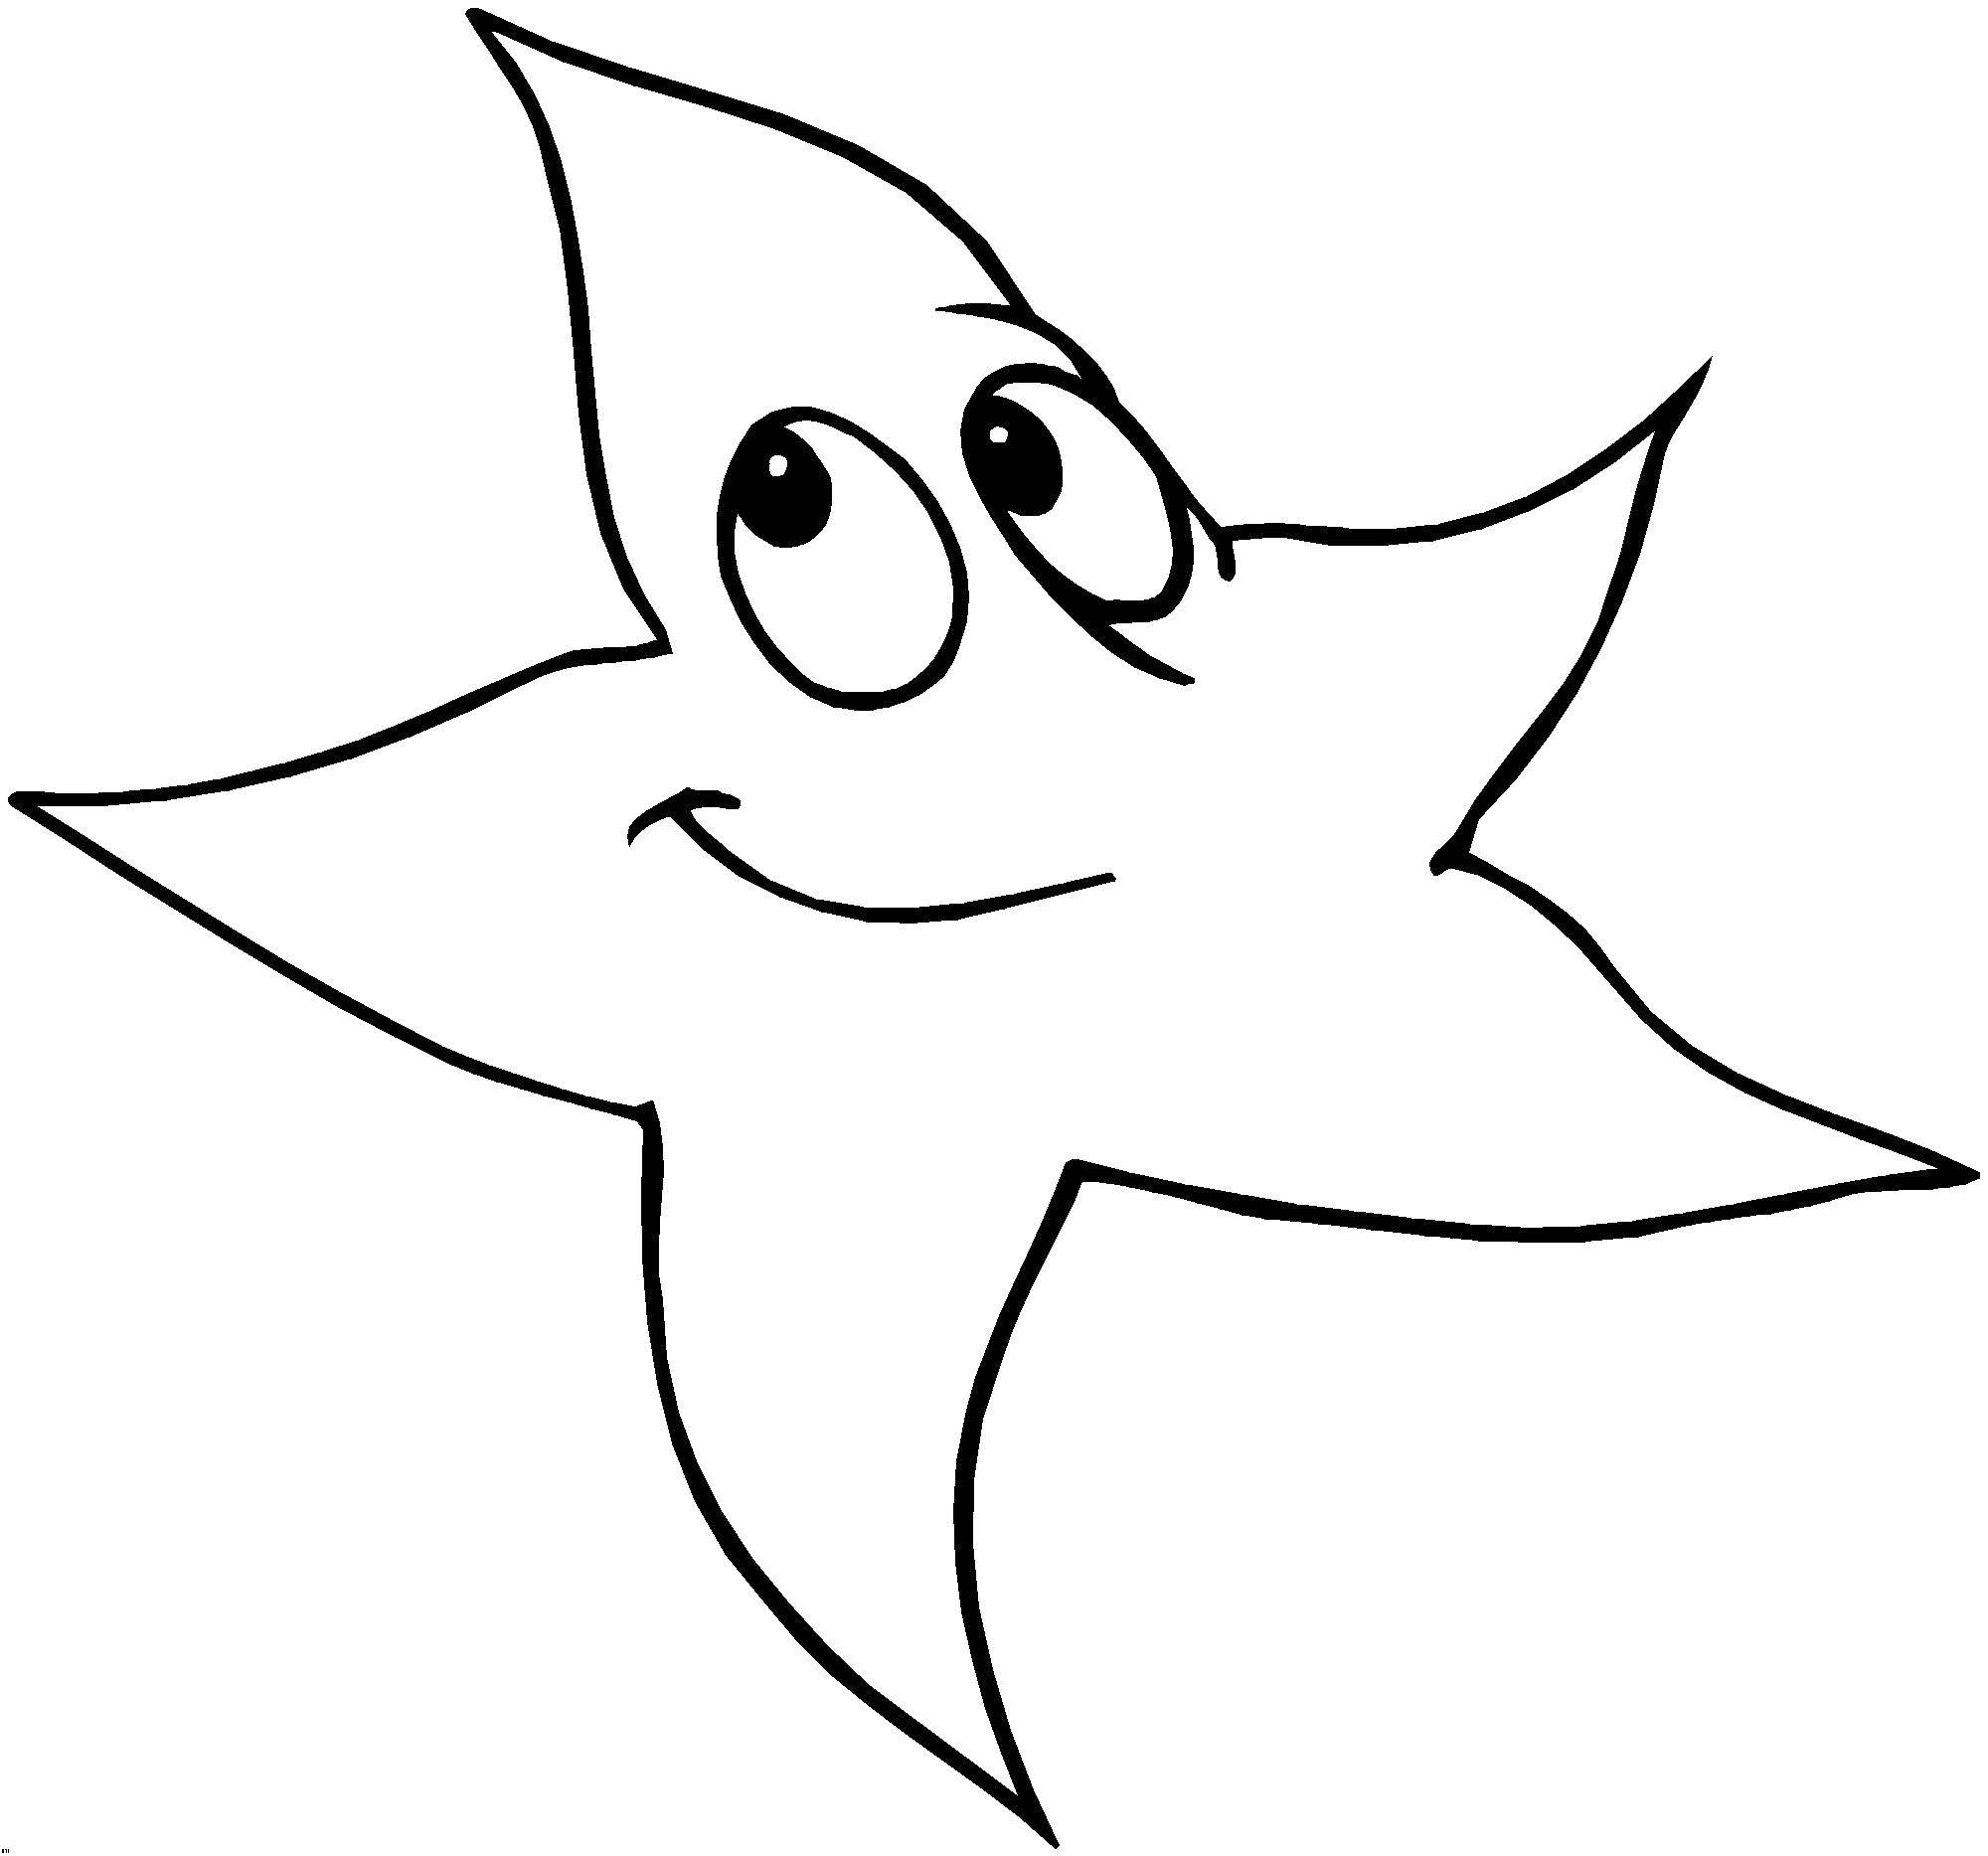 Coloring Star. Category marine. Tags:  Starfish.